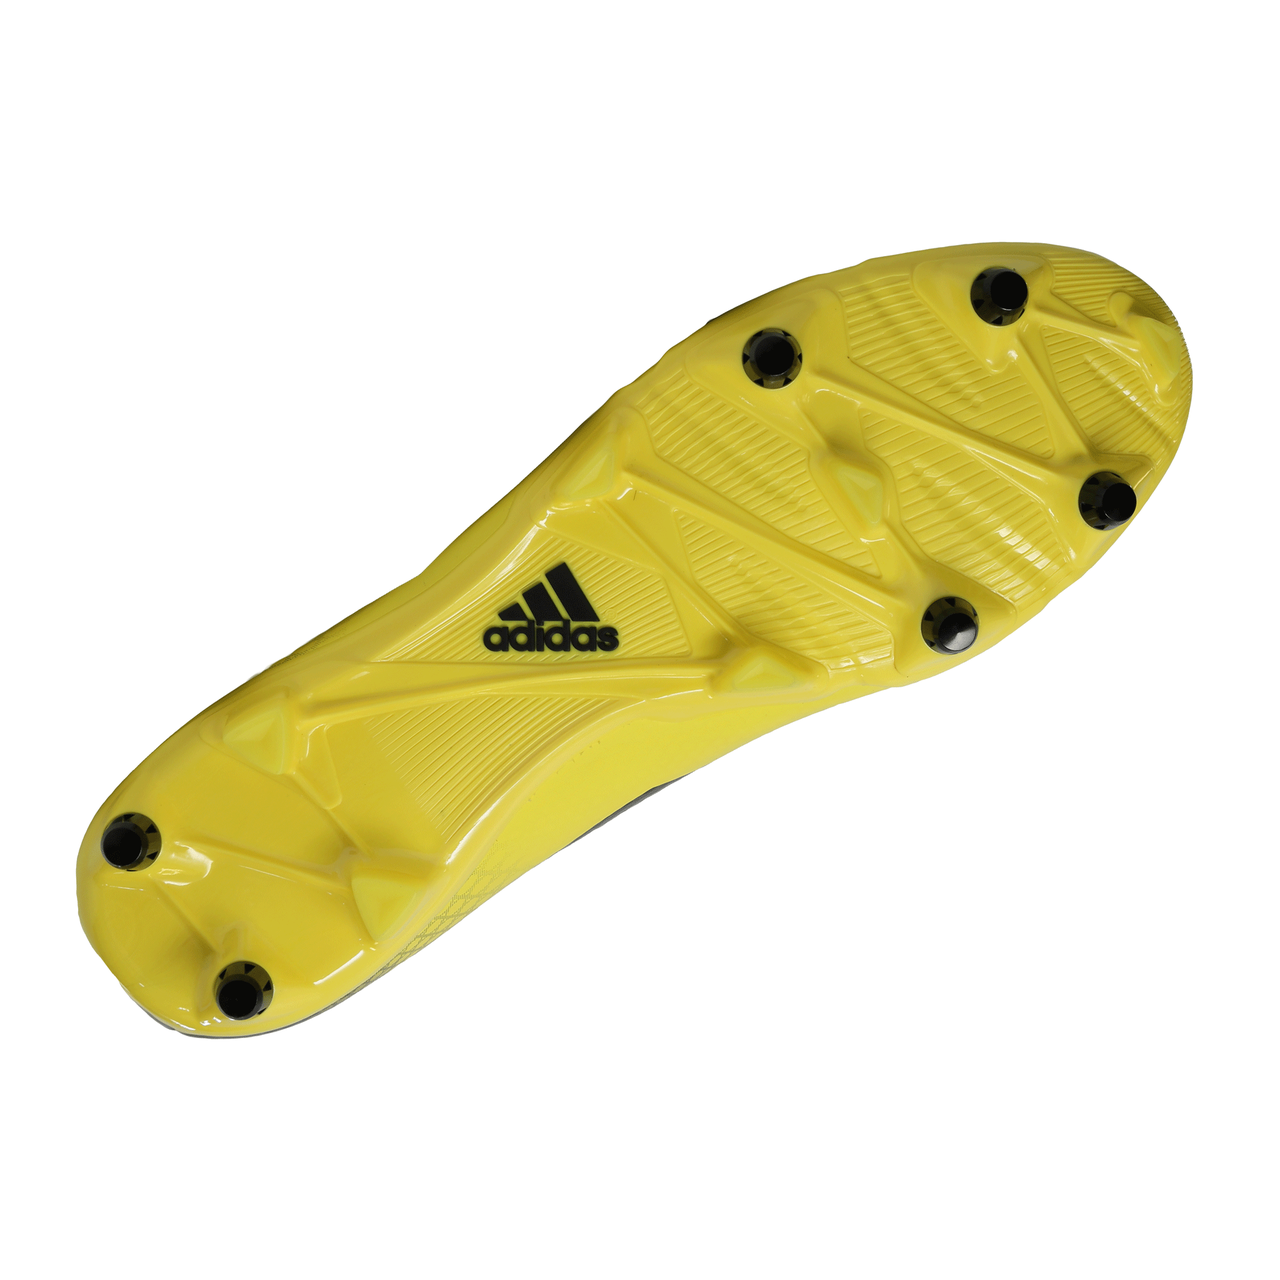 vendedor conocido animal Adidas Crazy Quick Malice SG (ELECTRIC YELLOW/CORE BLACK) on sale at Rugby  City | 59.99